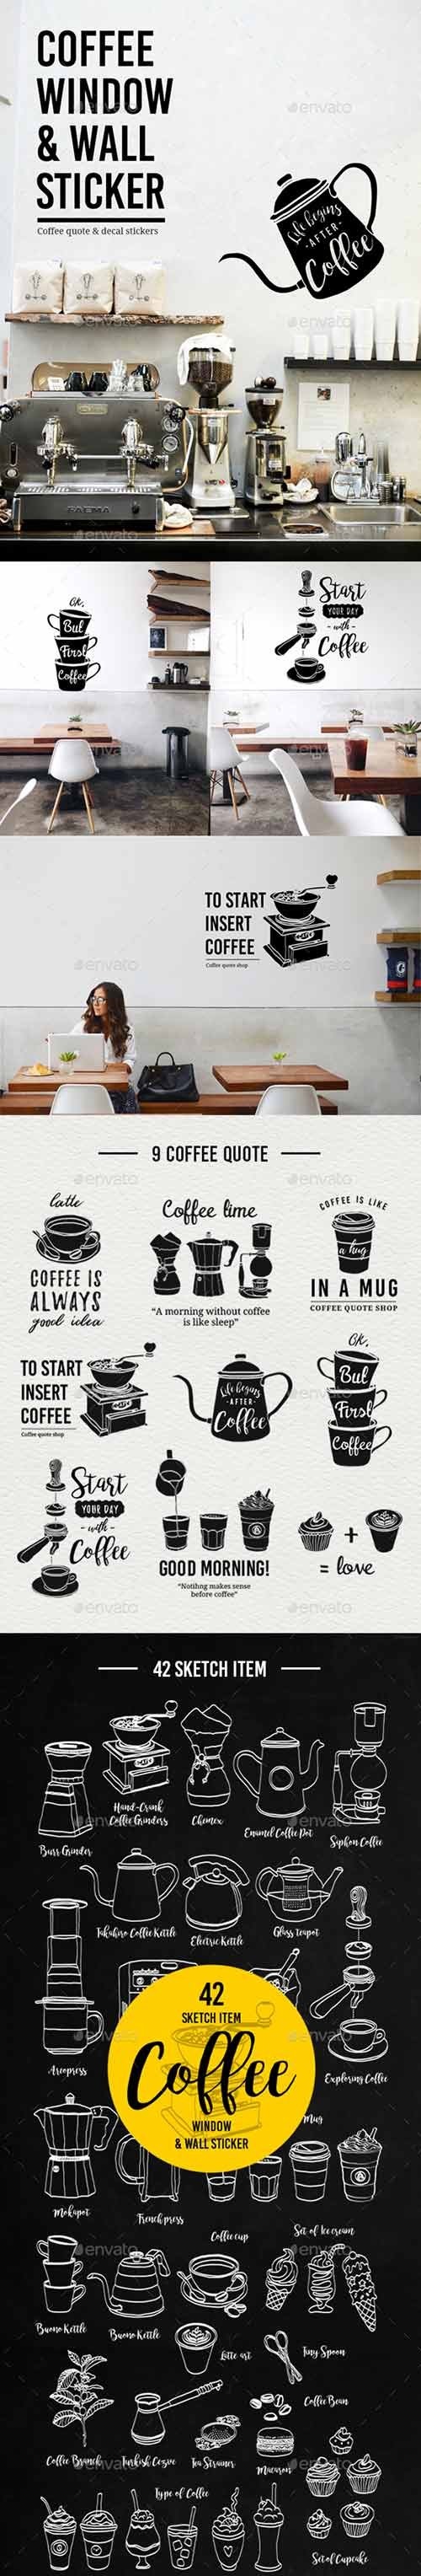 Coffee Window and Wall Stickers 20159950